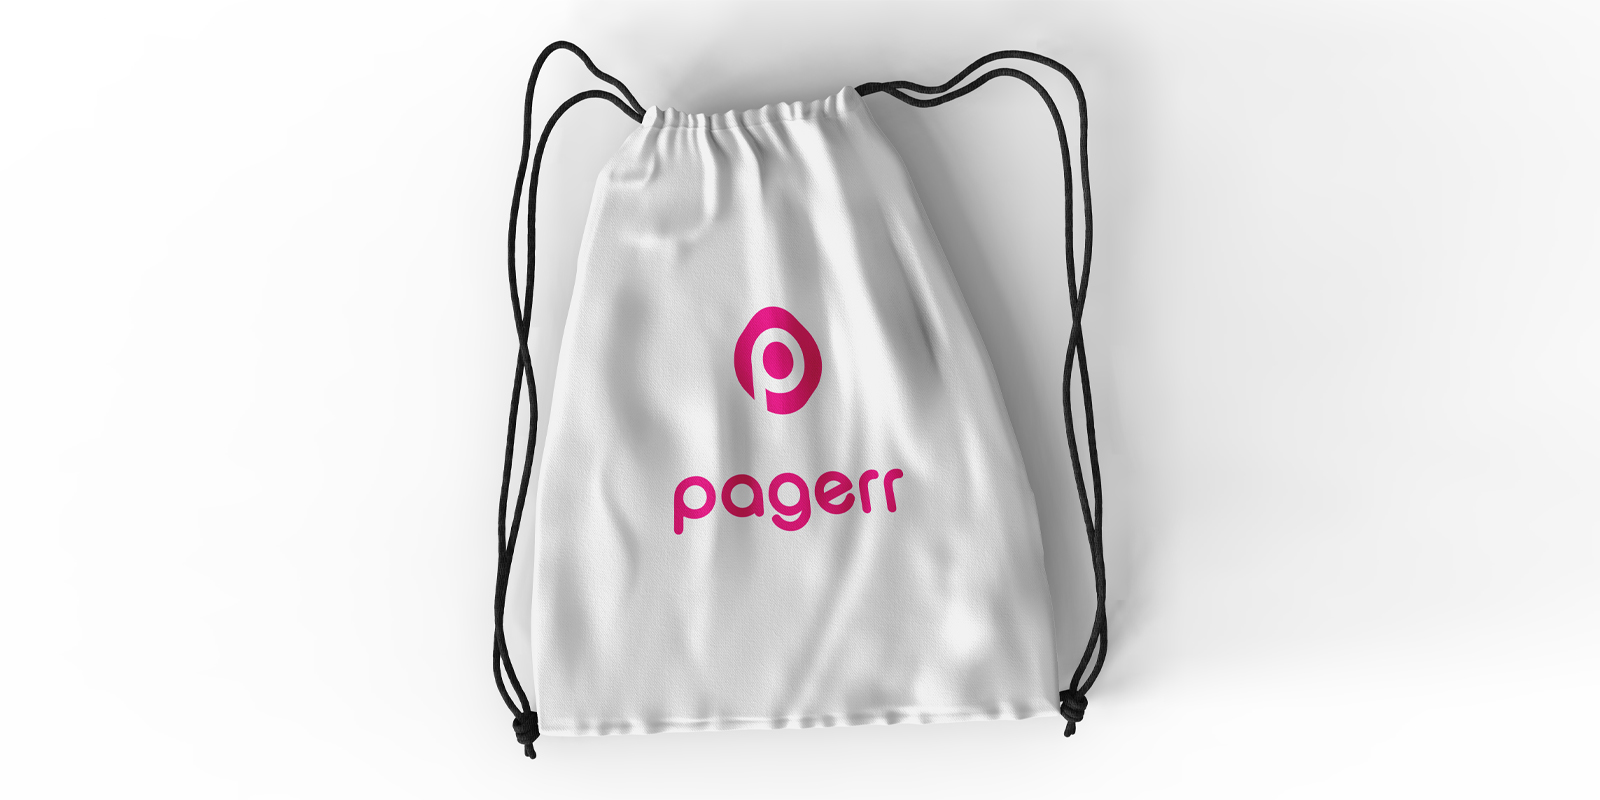 Drawstring backpacks in Perth - Print with Pagerr